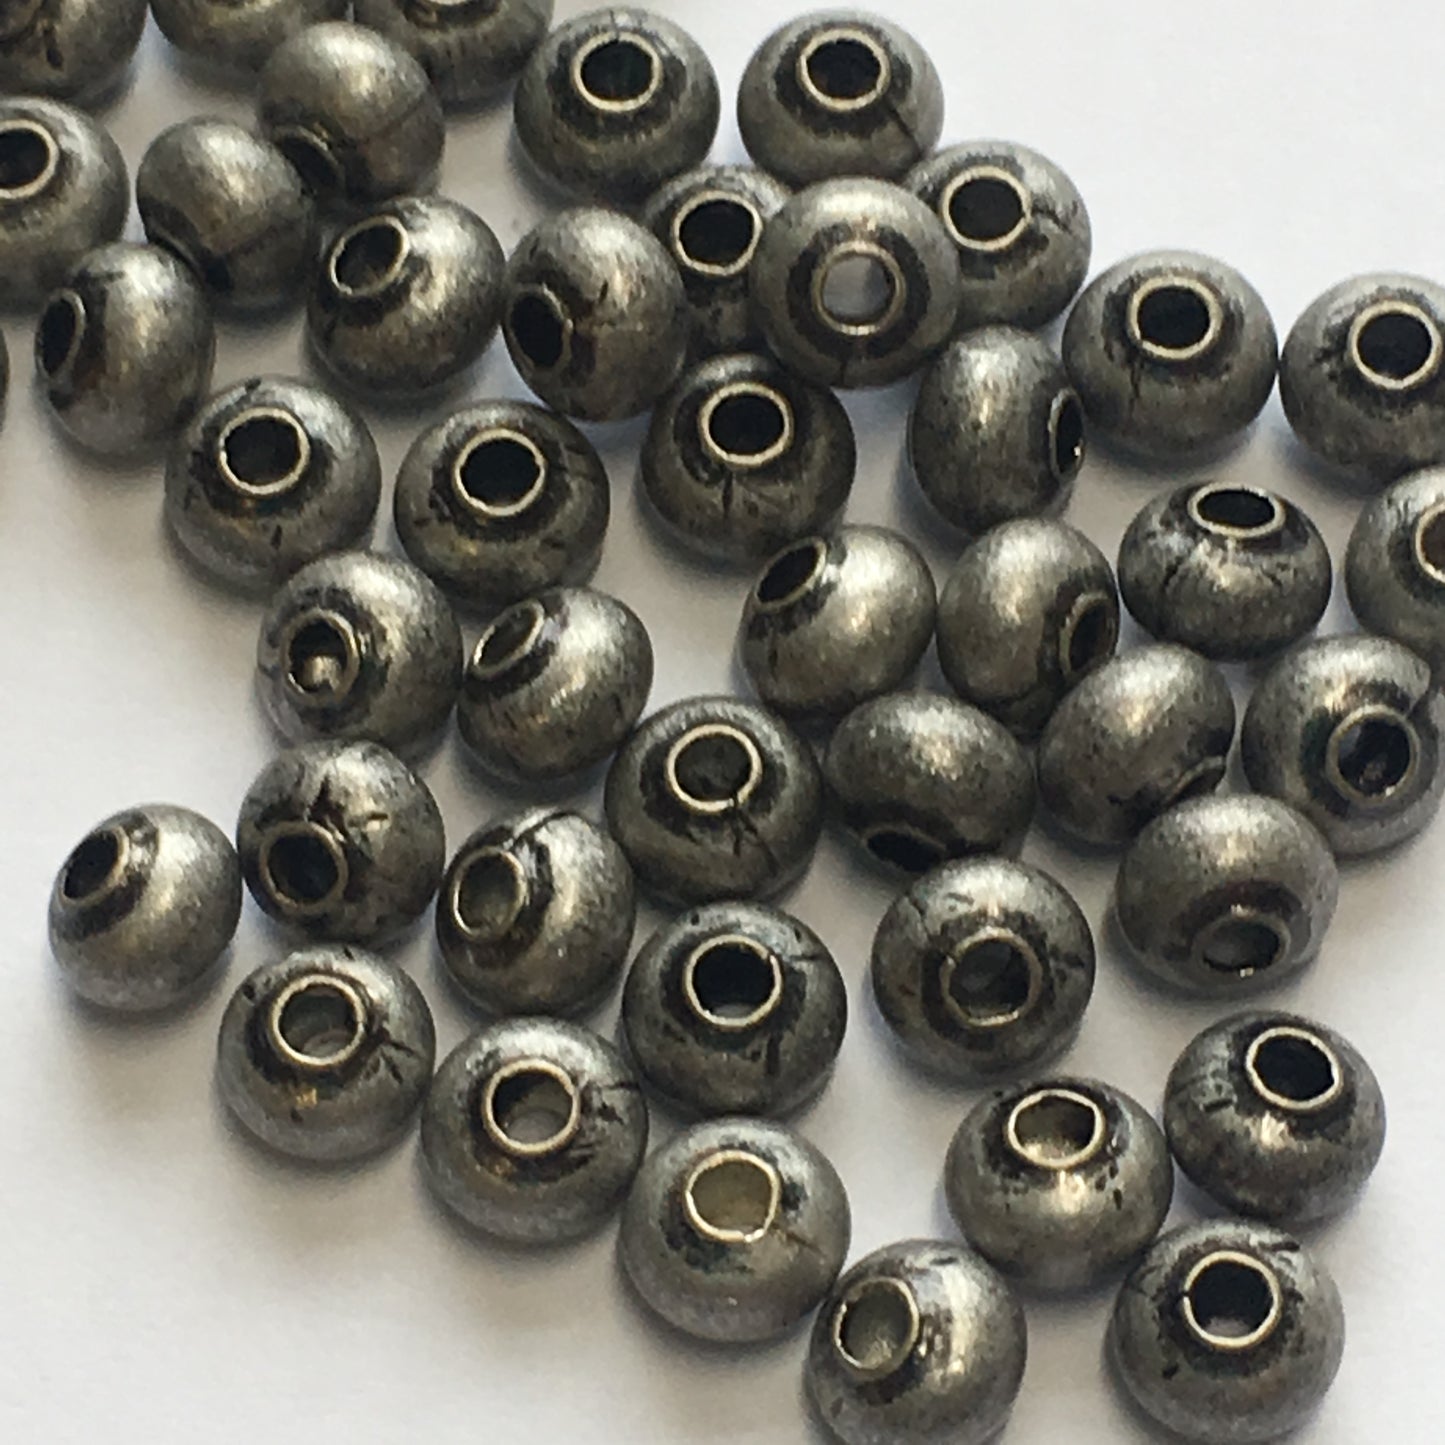 Antique Pewter Finish Smooth Saucer Beads, 4.5 x 3.2 mm - 50 Beads